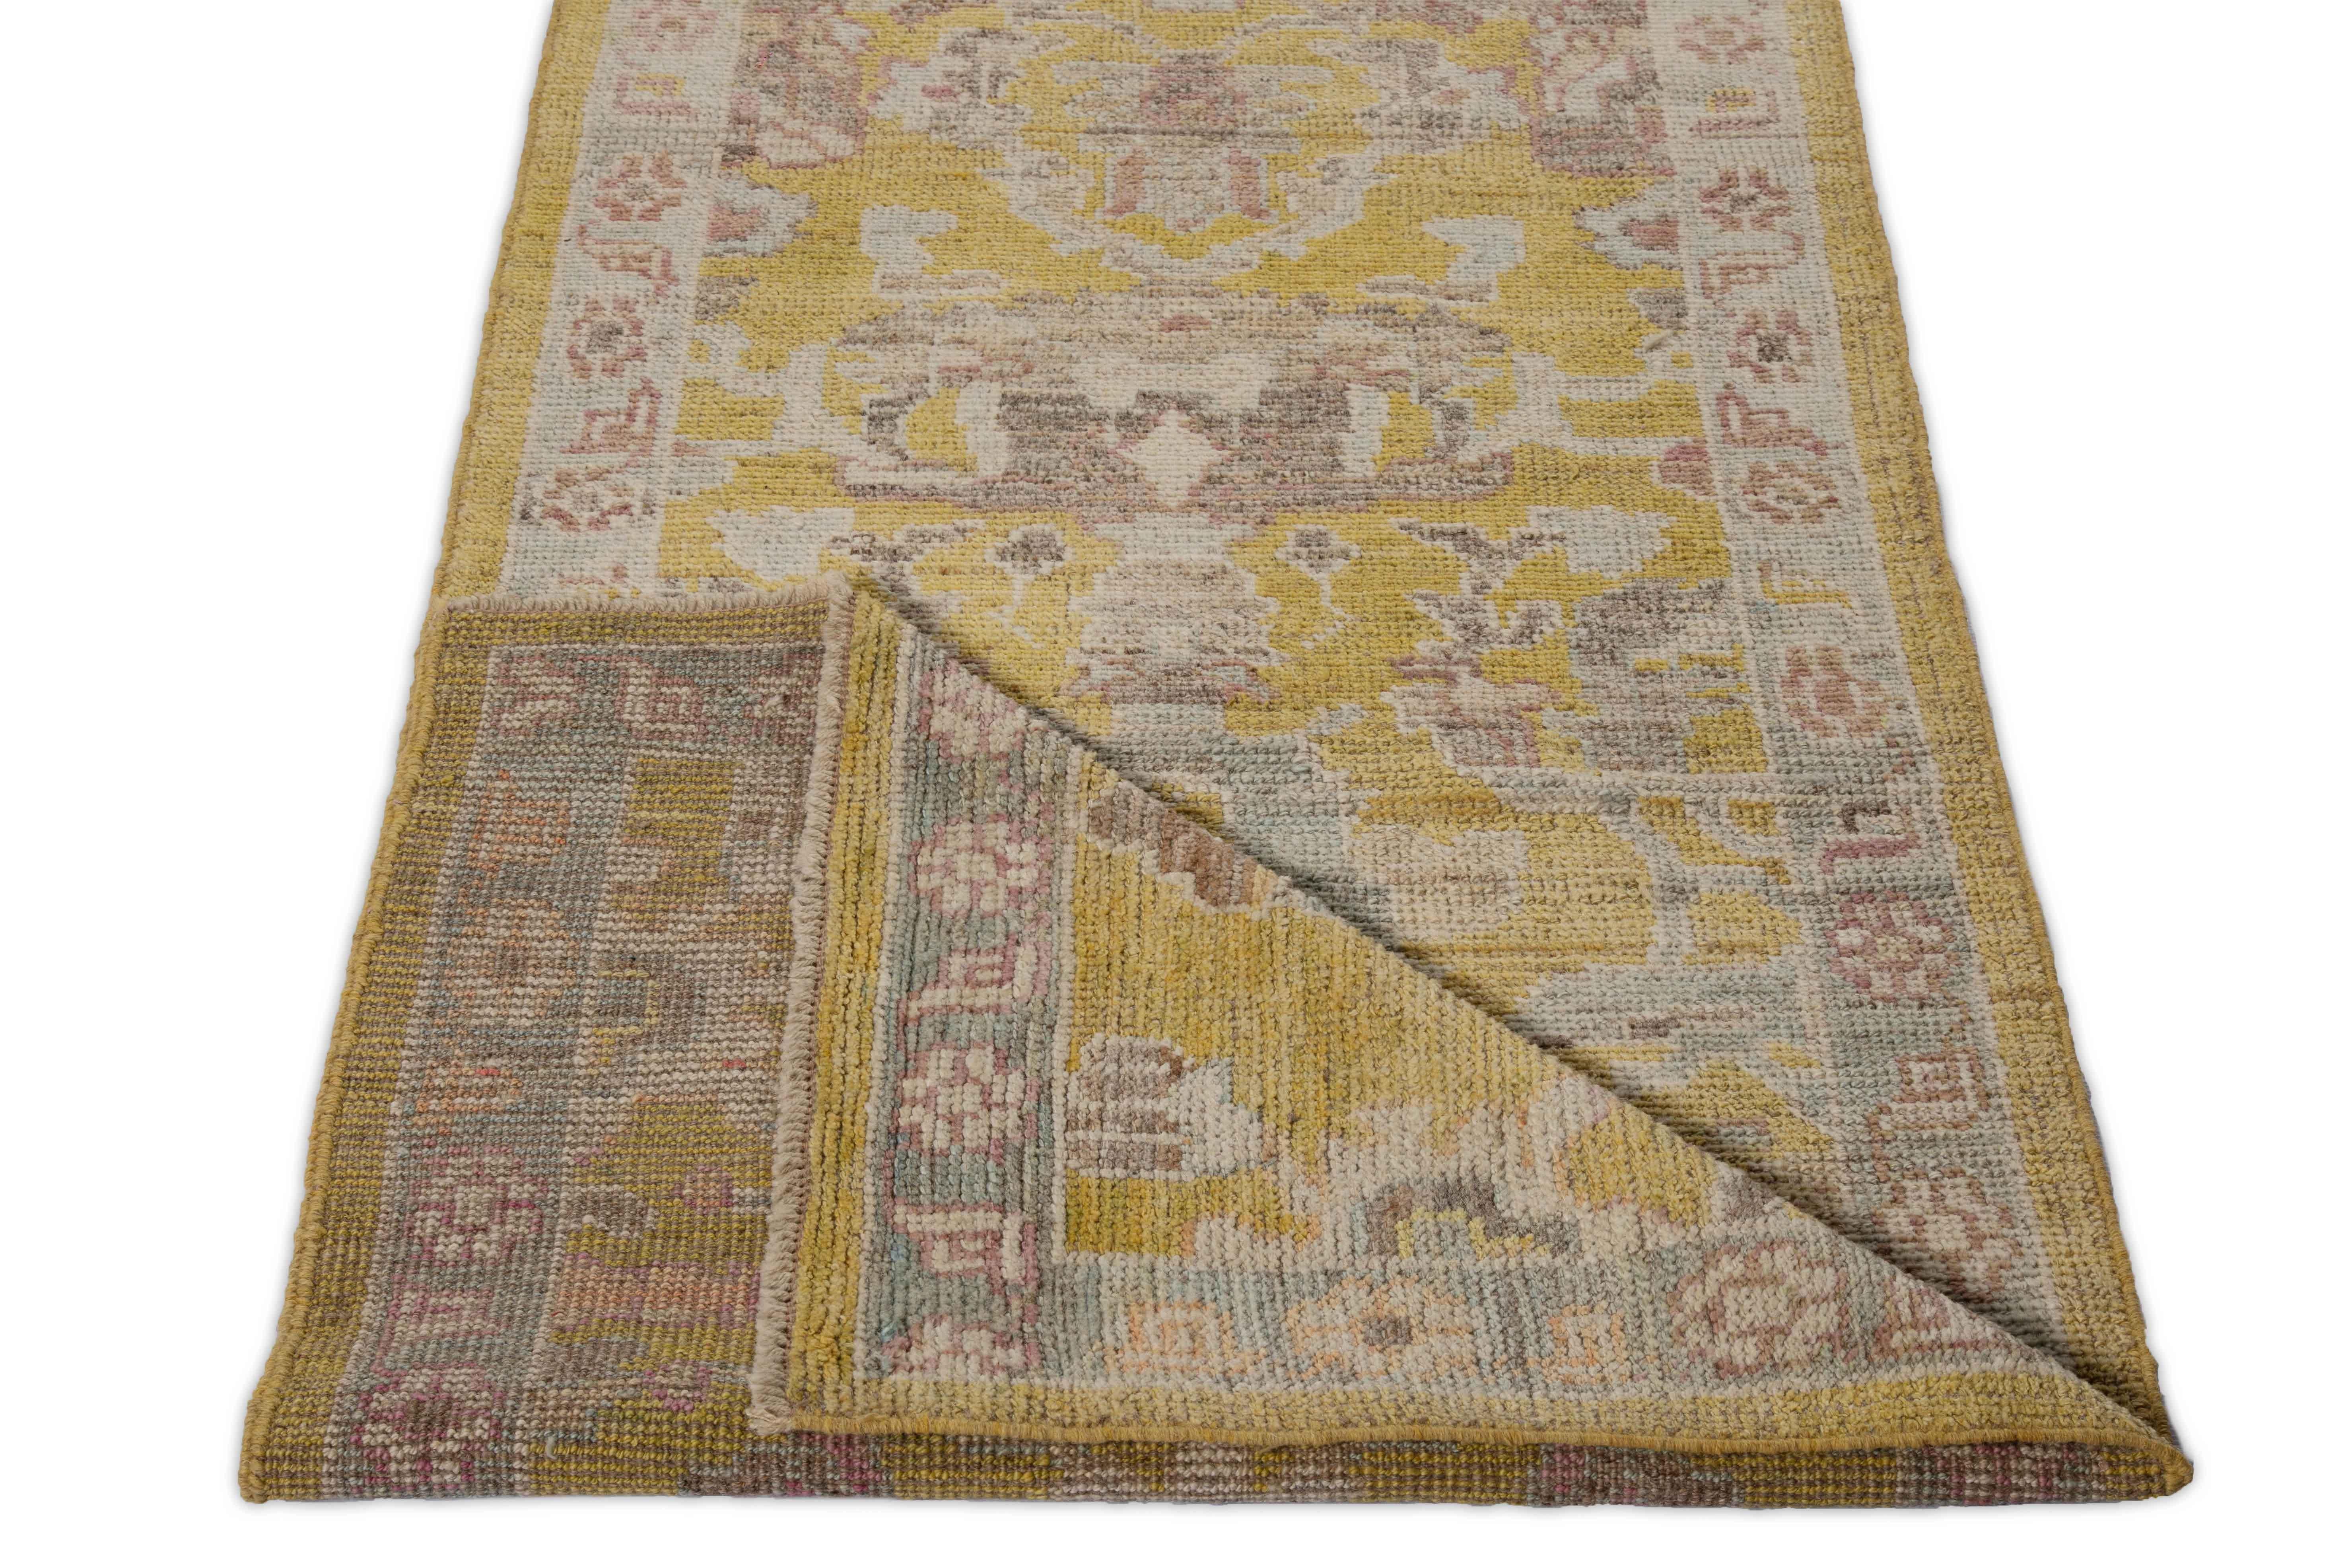 Hand-Woven Contemporary Oushak Runner Rug from Turkey with Gold and Pink Floral Patterns For Sale